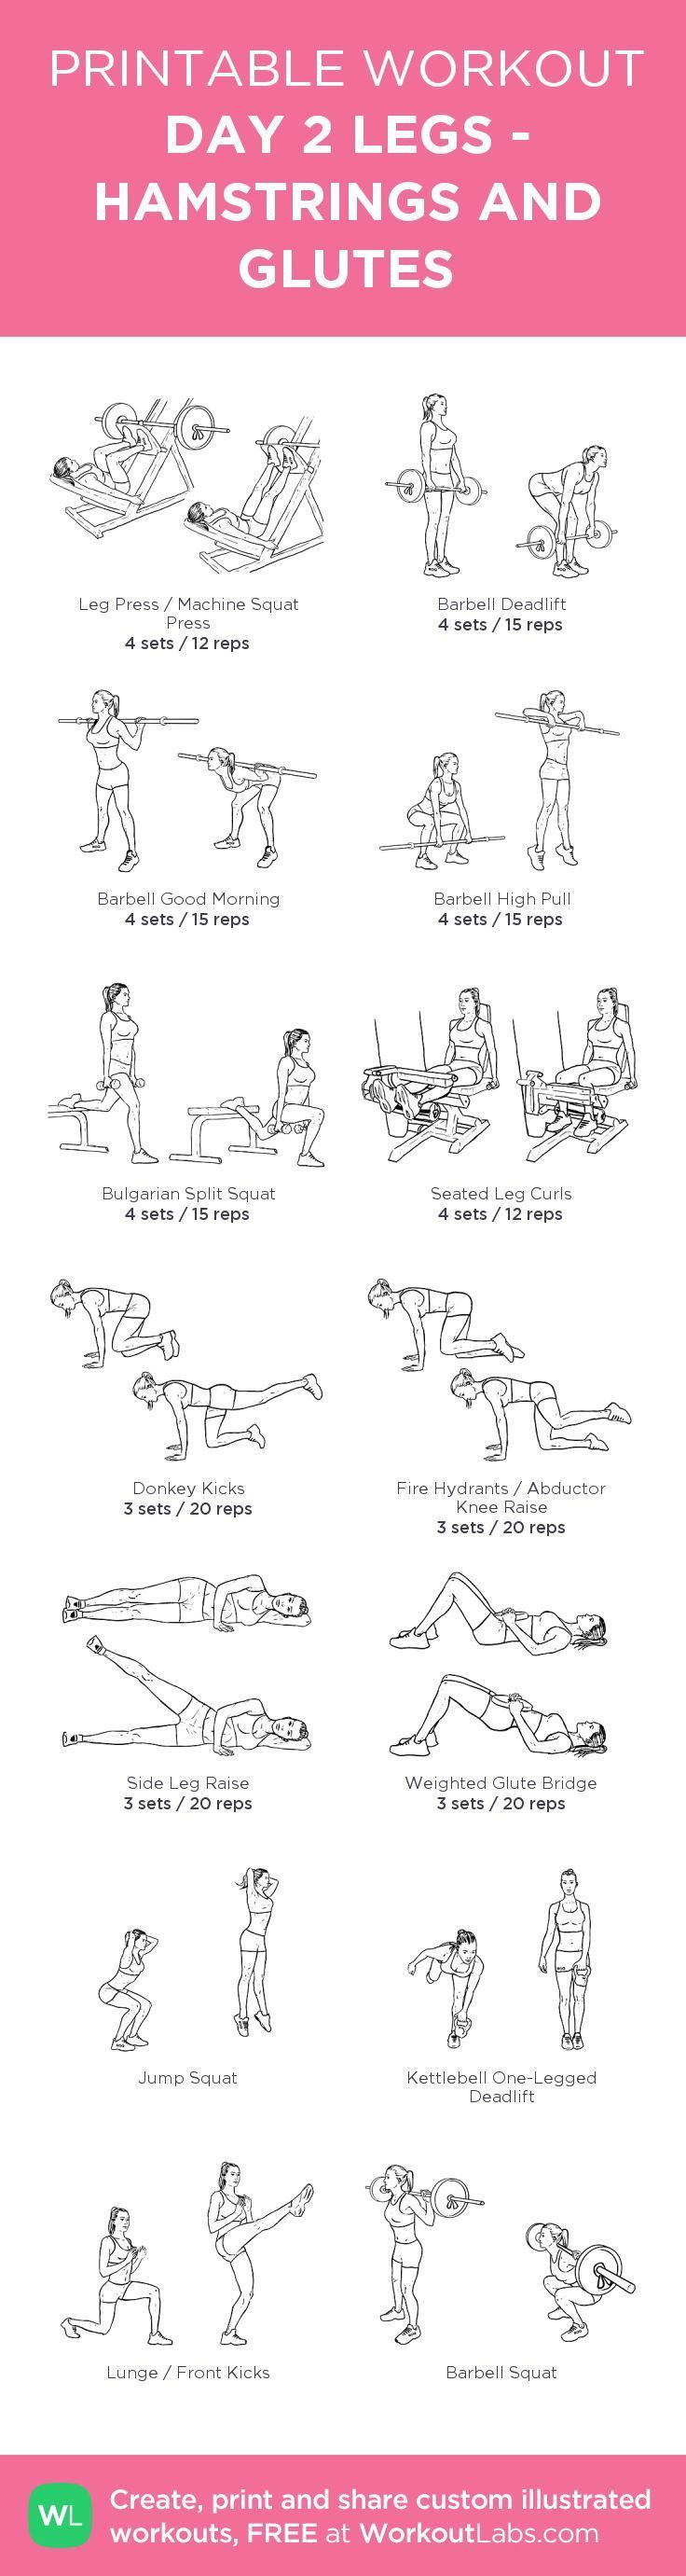 Whether it’s six-pack abs, gain weight or weight loss, these workouts will help you reach your fitness goals. No gym or